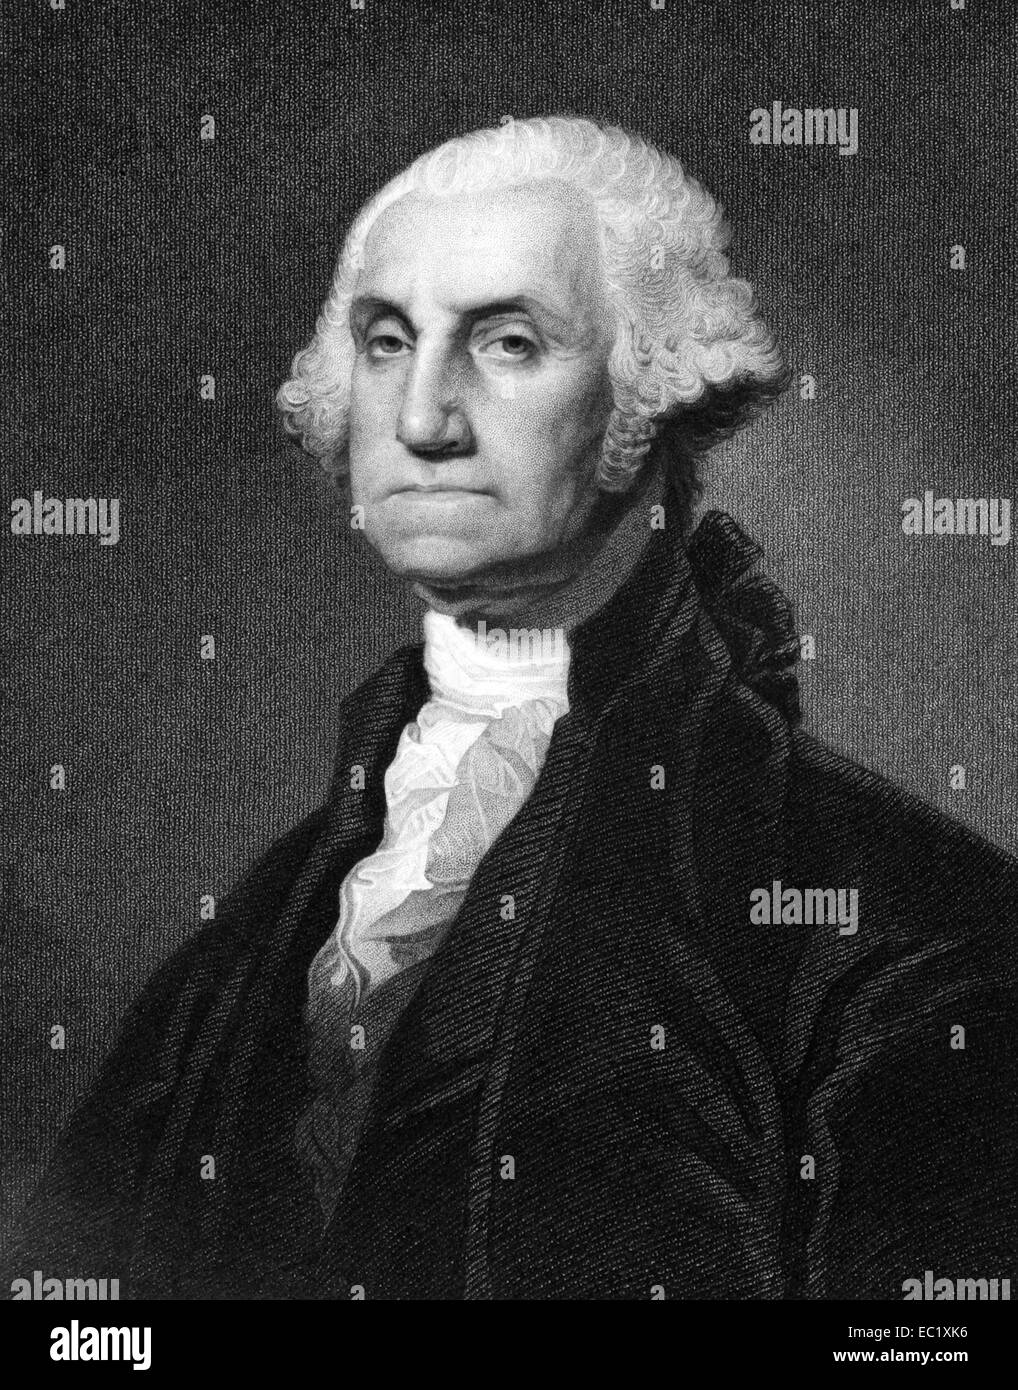 George Washington (1731-1799) on engraving from 1873. First President of the U.S.A. during 1789-1797. Stock Photo